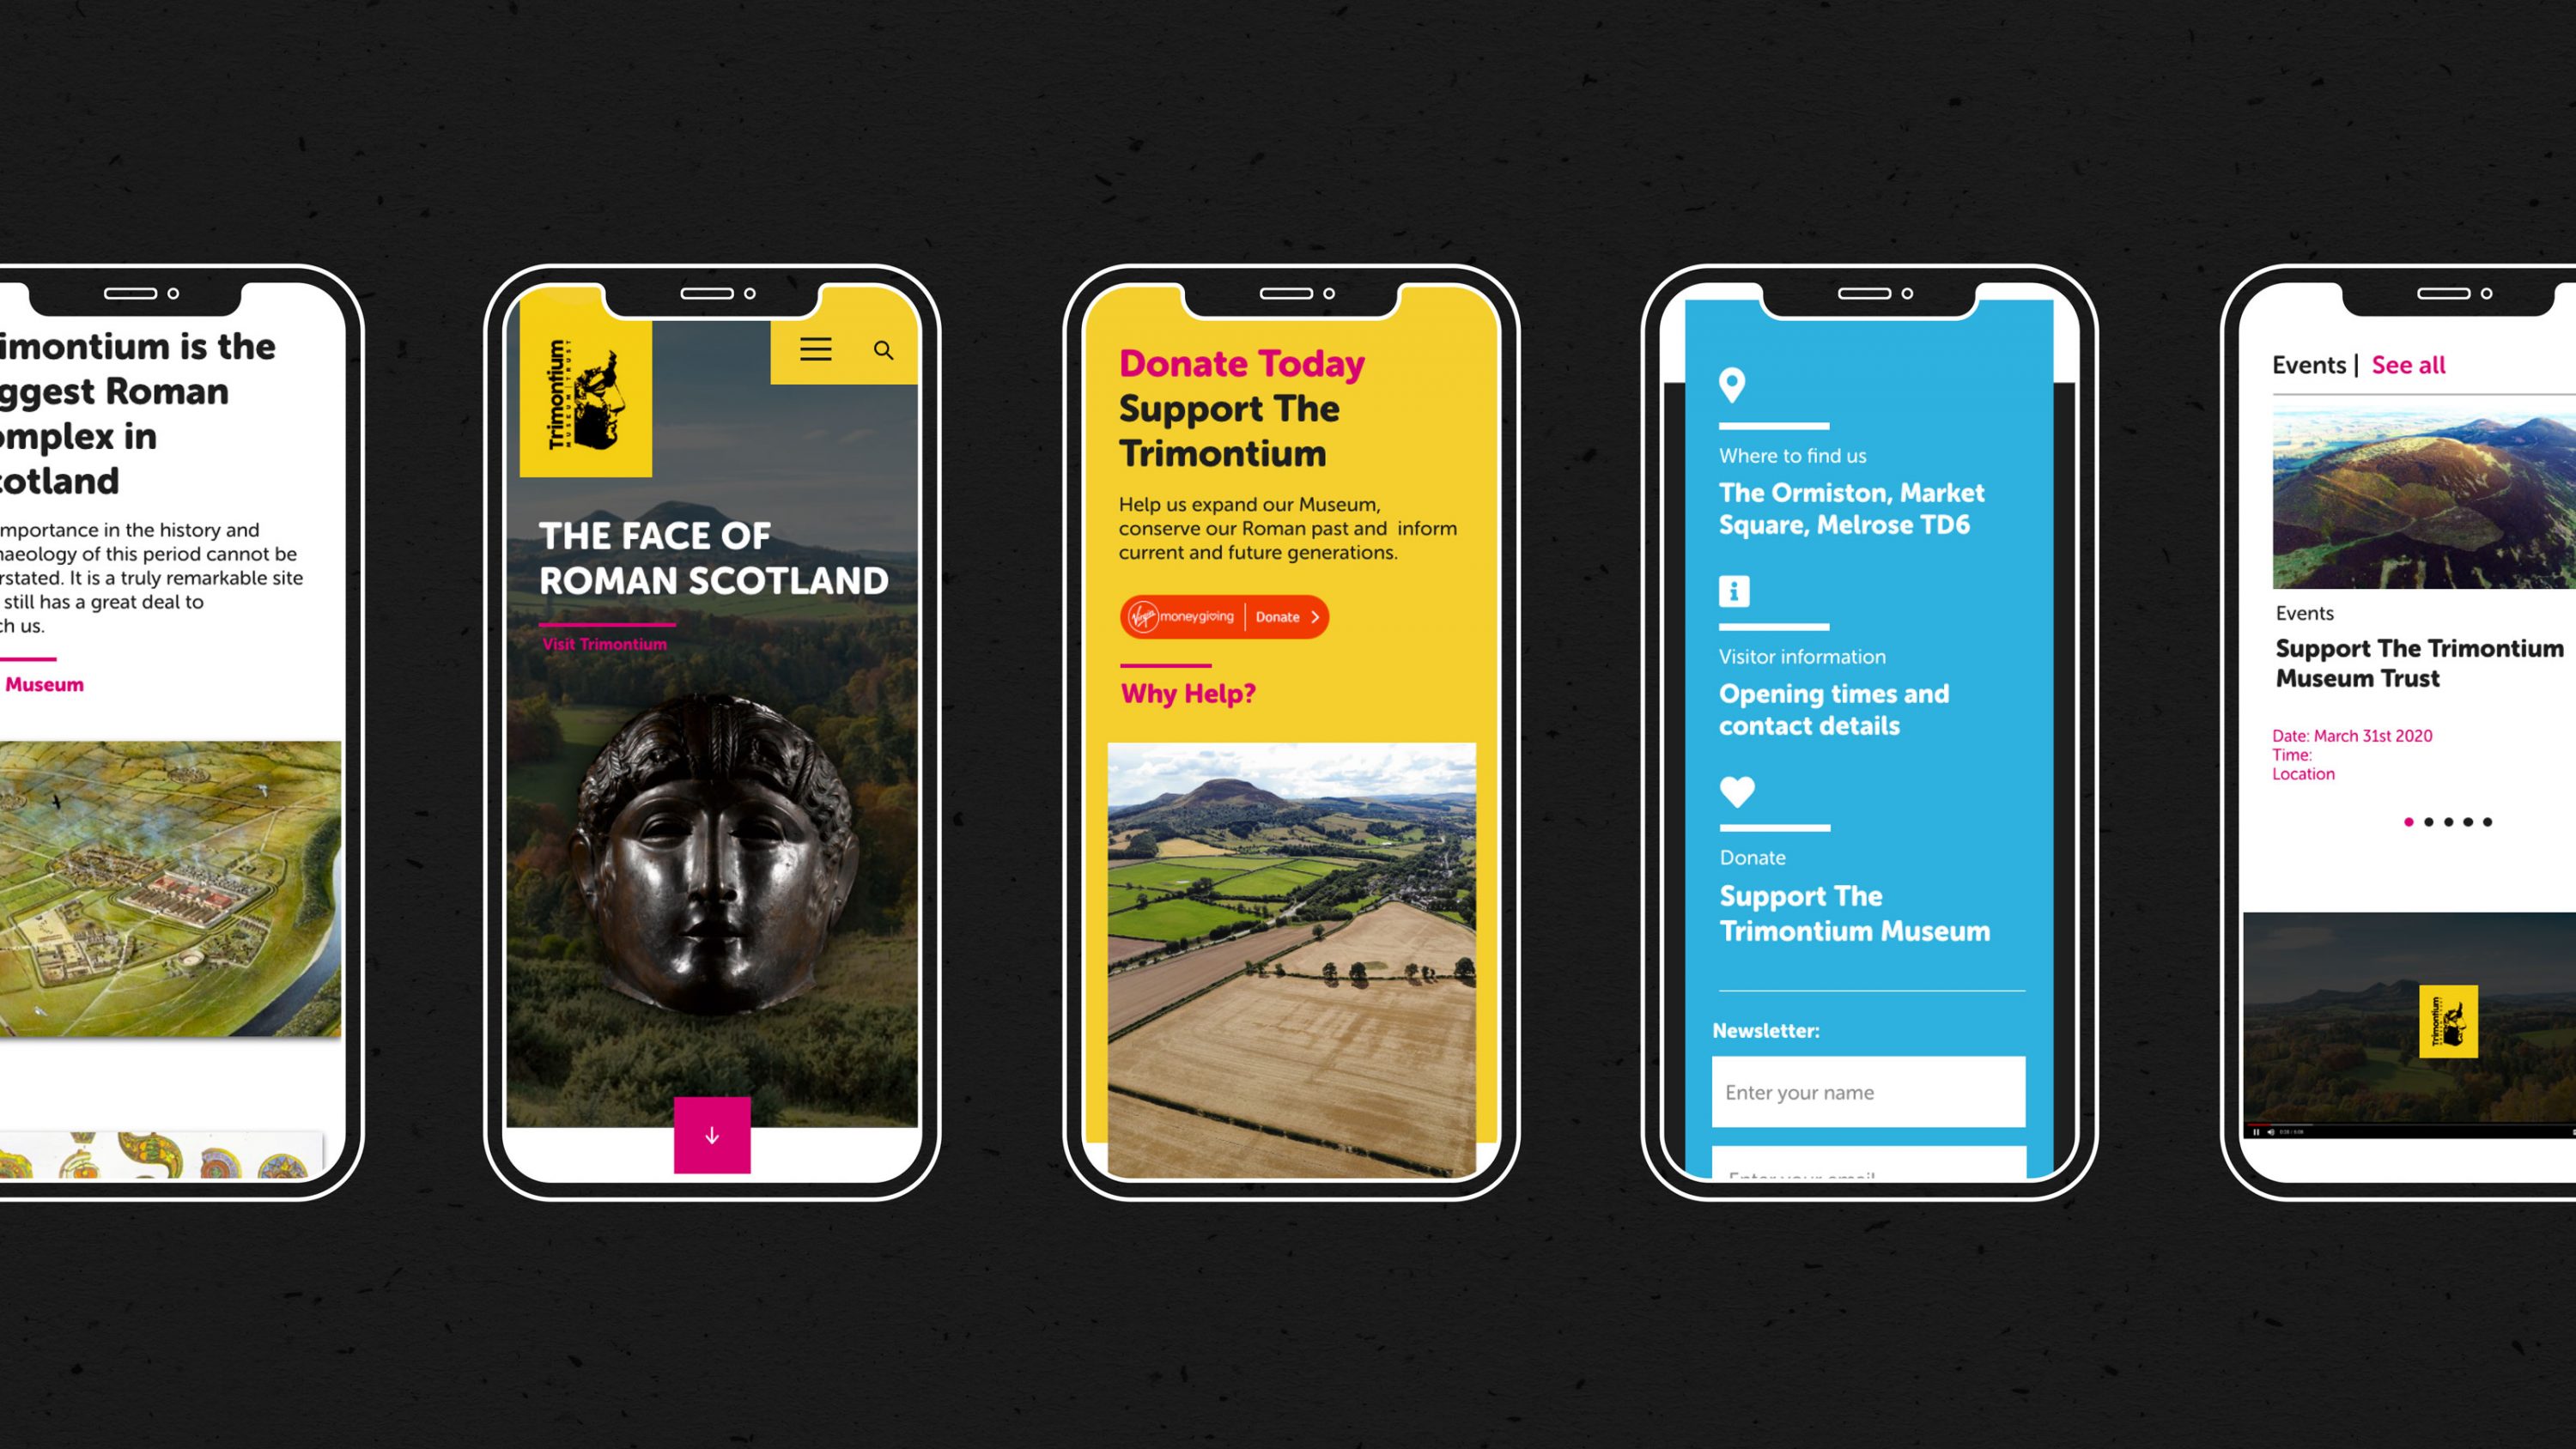 Wordpress Mobile website design examples for Trimontium Museum Trust by Web Design, Branding and Digital Agency, Creatomatic